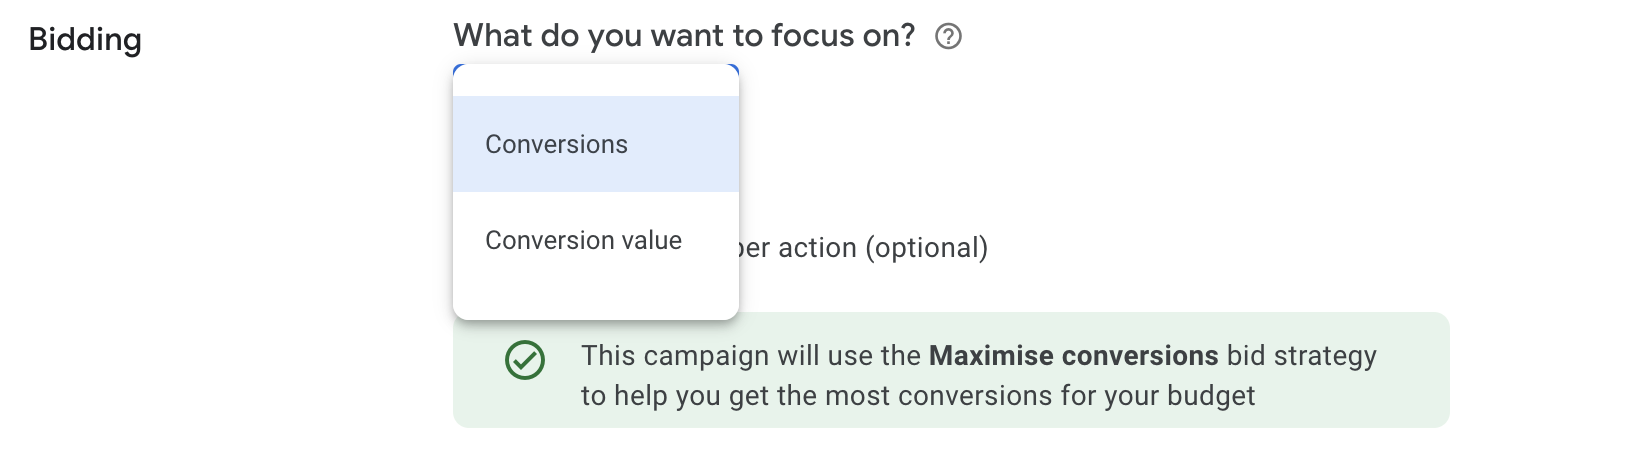 Screen shot of the bid strategy options for Google Ad Performance Max Campaigns - choose optimise for conversions or optimise for conversion value